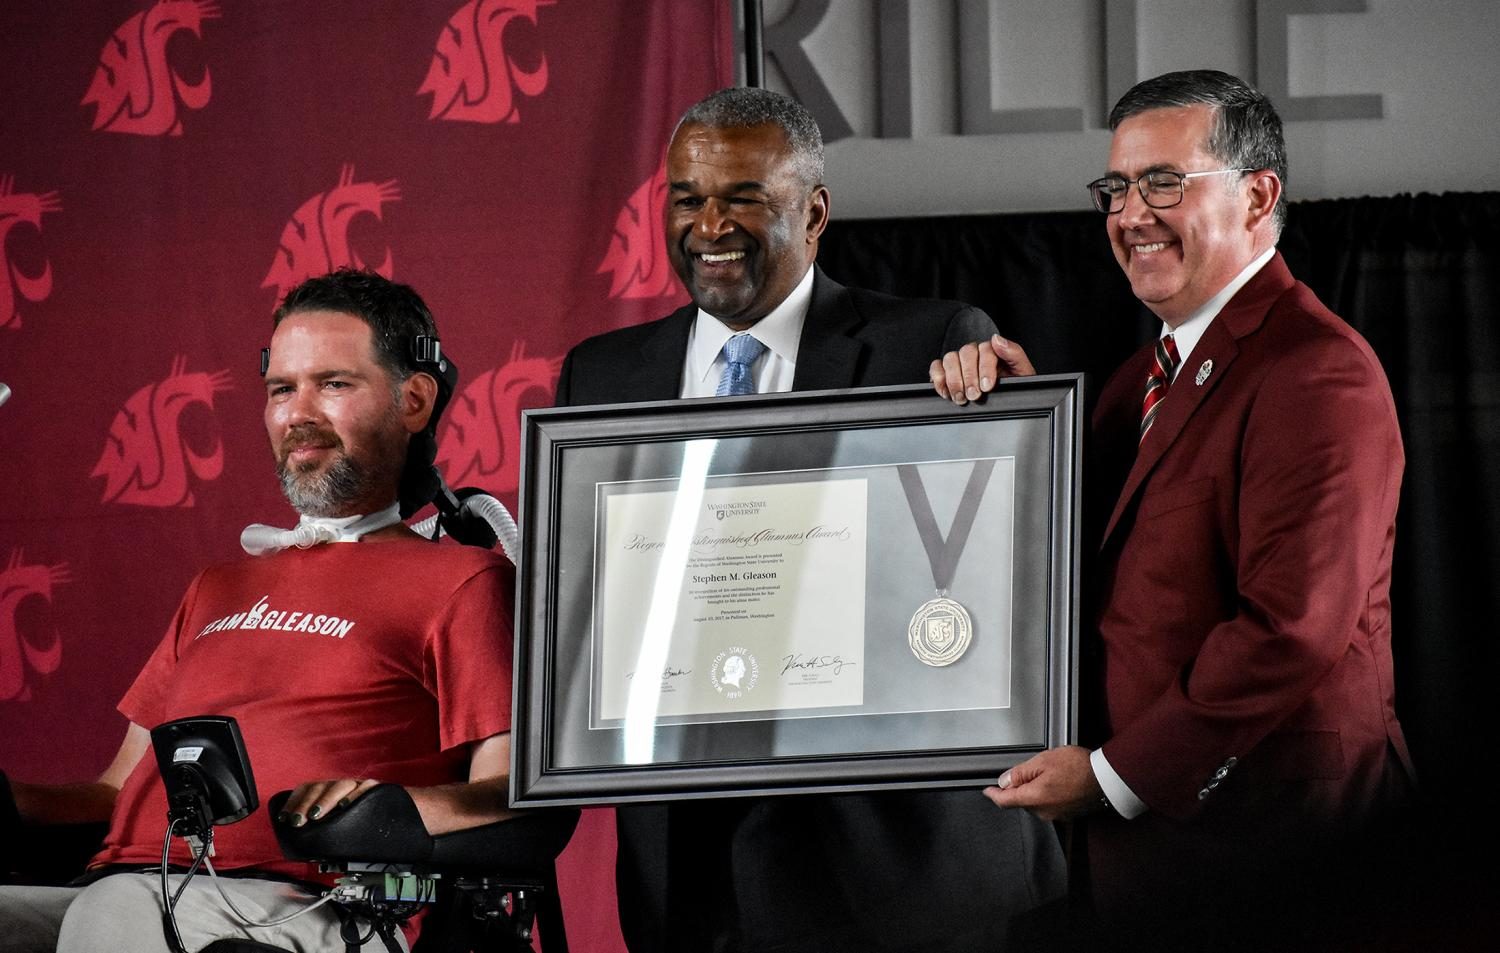 WSU alumnus and former football player was presented with the Regents’ Distinguished Alumnus Award for his contributions to finding a cure for ALS.